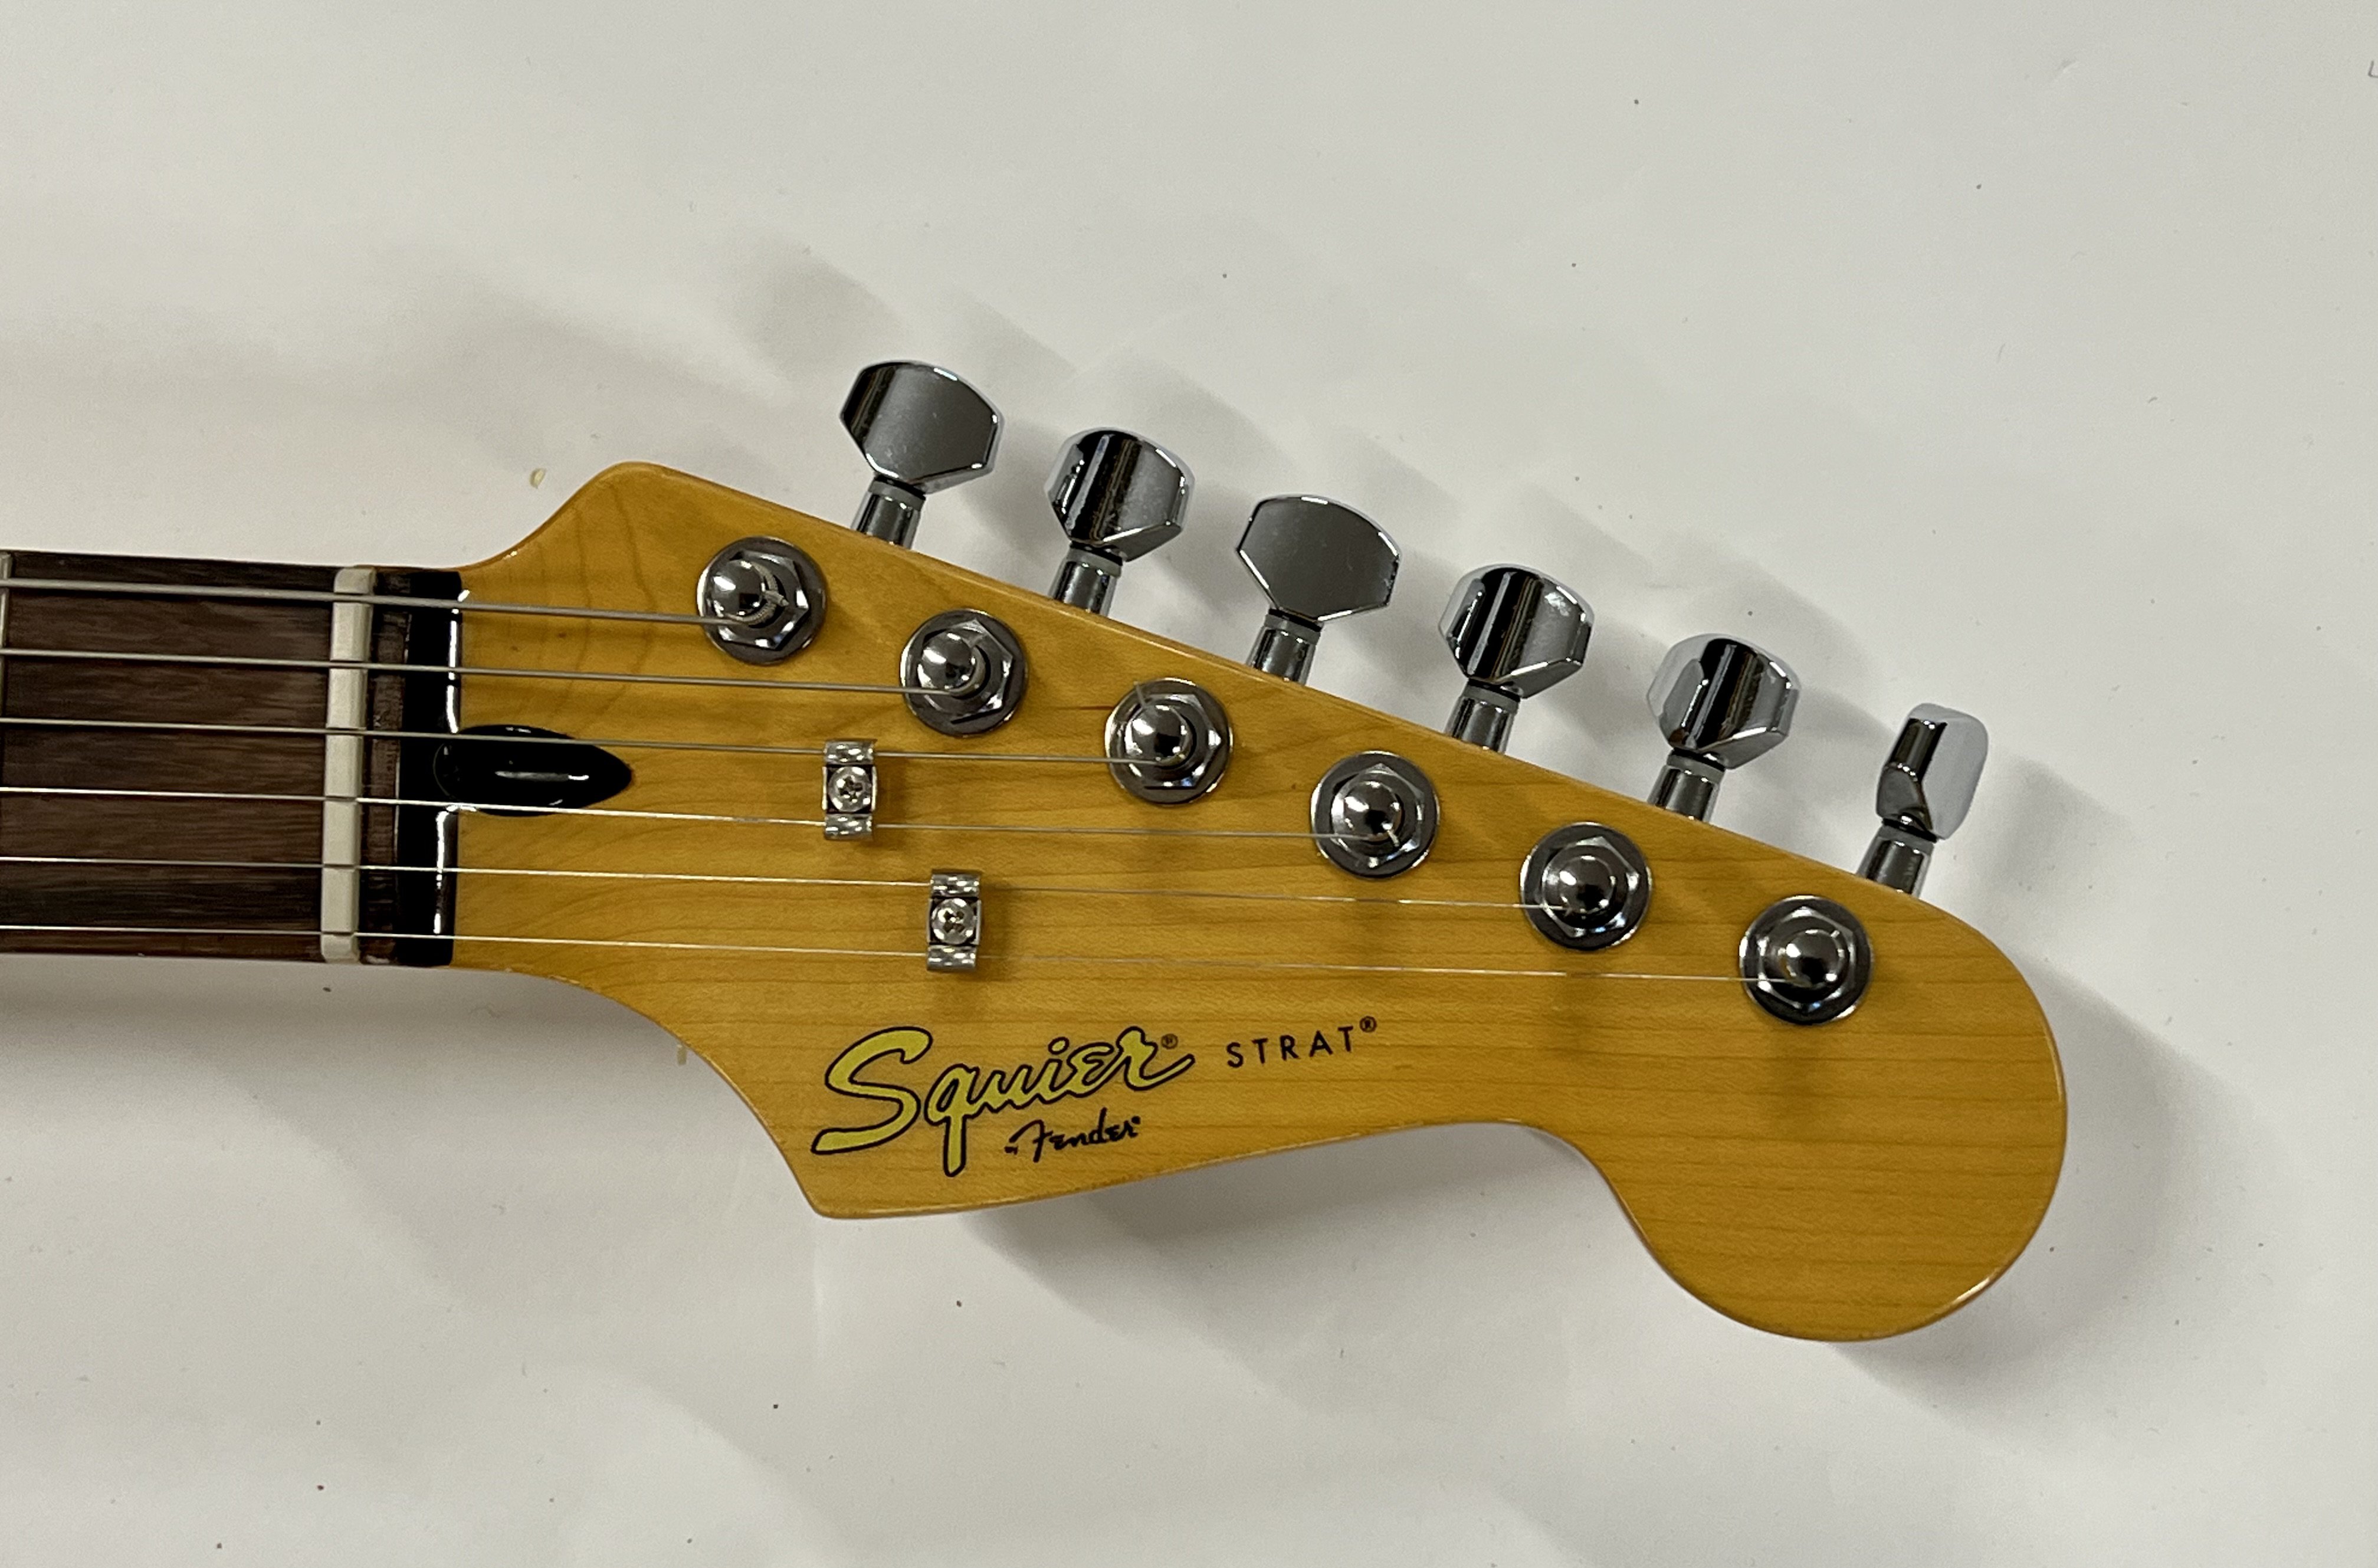 A Squier Stratocaster guitar in Fender Tweed Case - Image 3 of 5